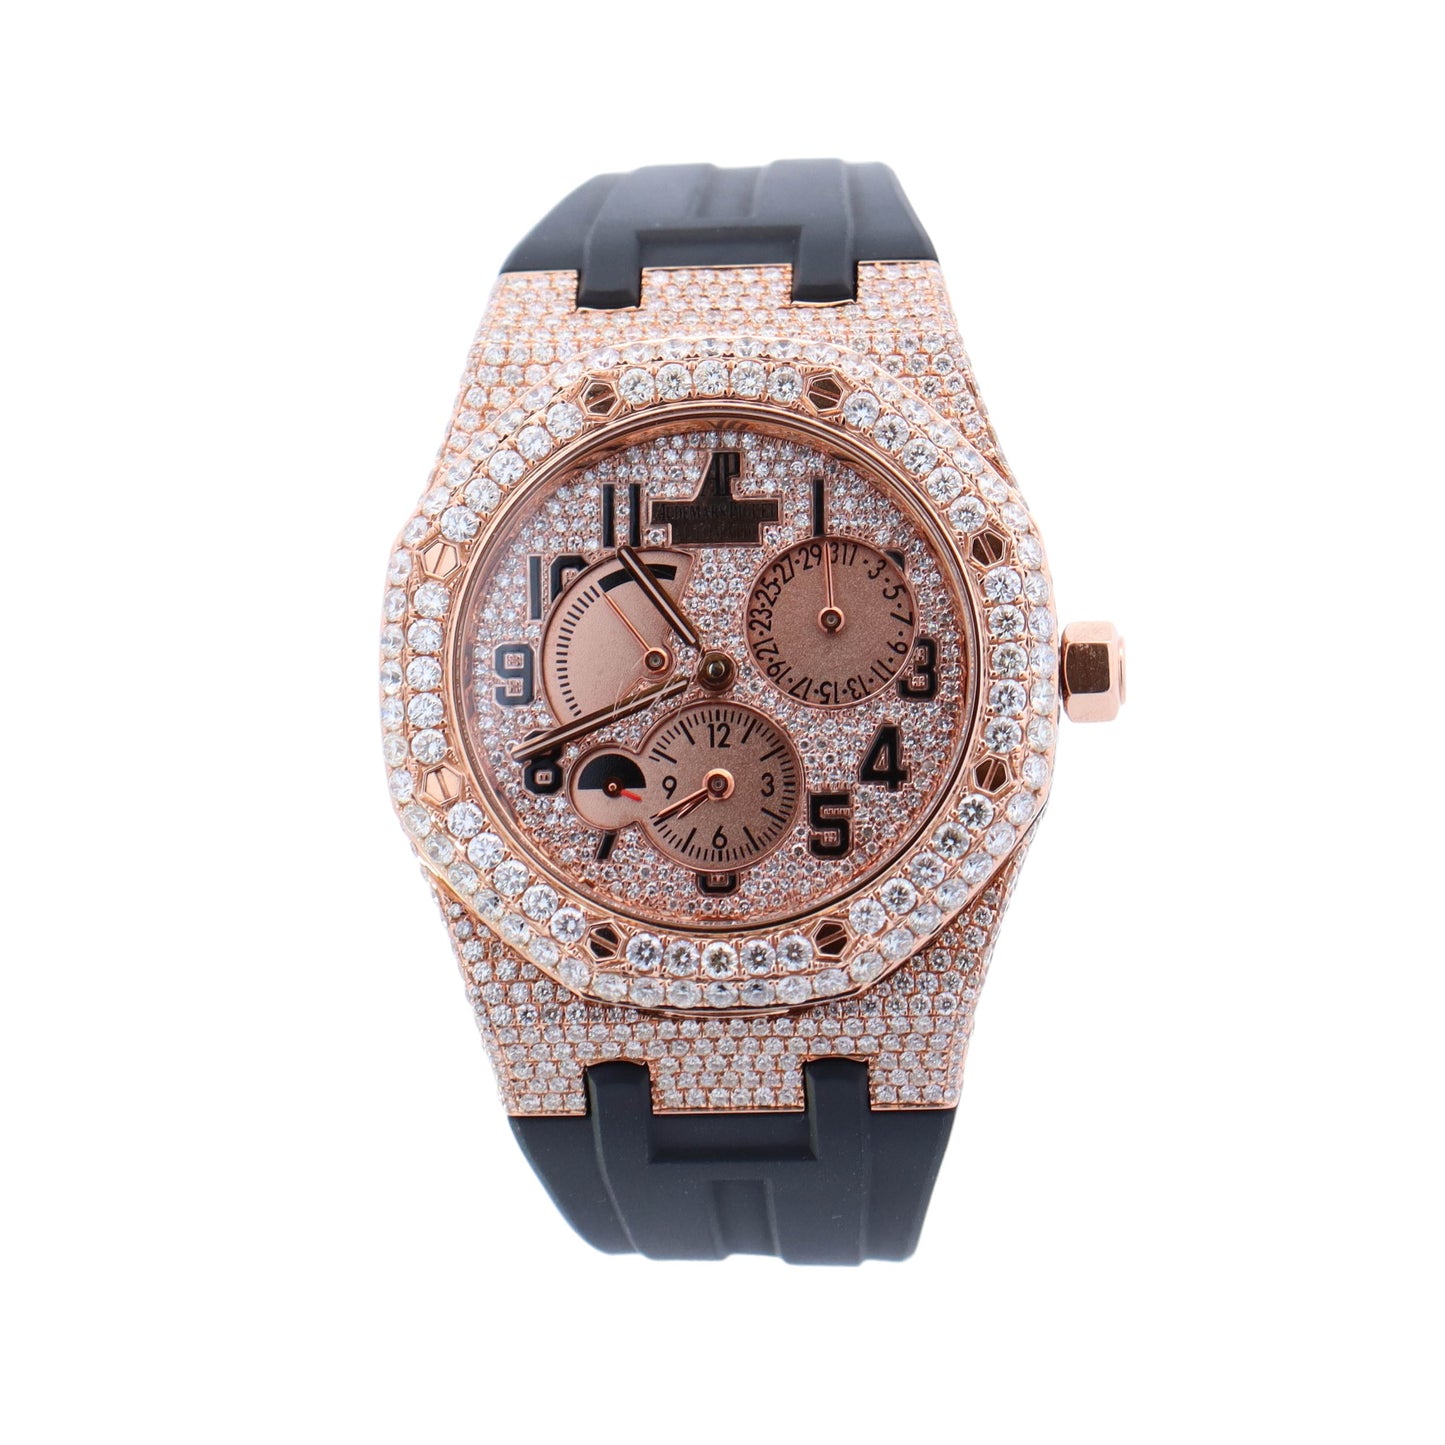 Audemars Piguet Dual Time " Iced Out" Rose Gold 39mm Custom Pave Diamond Dial Watch  Reference #:  26120OR.OO.D088CR.01 - Happy Jewelers Fine Jewelry Lifetime Warranty